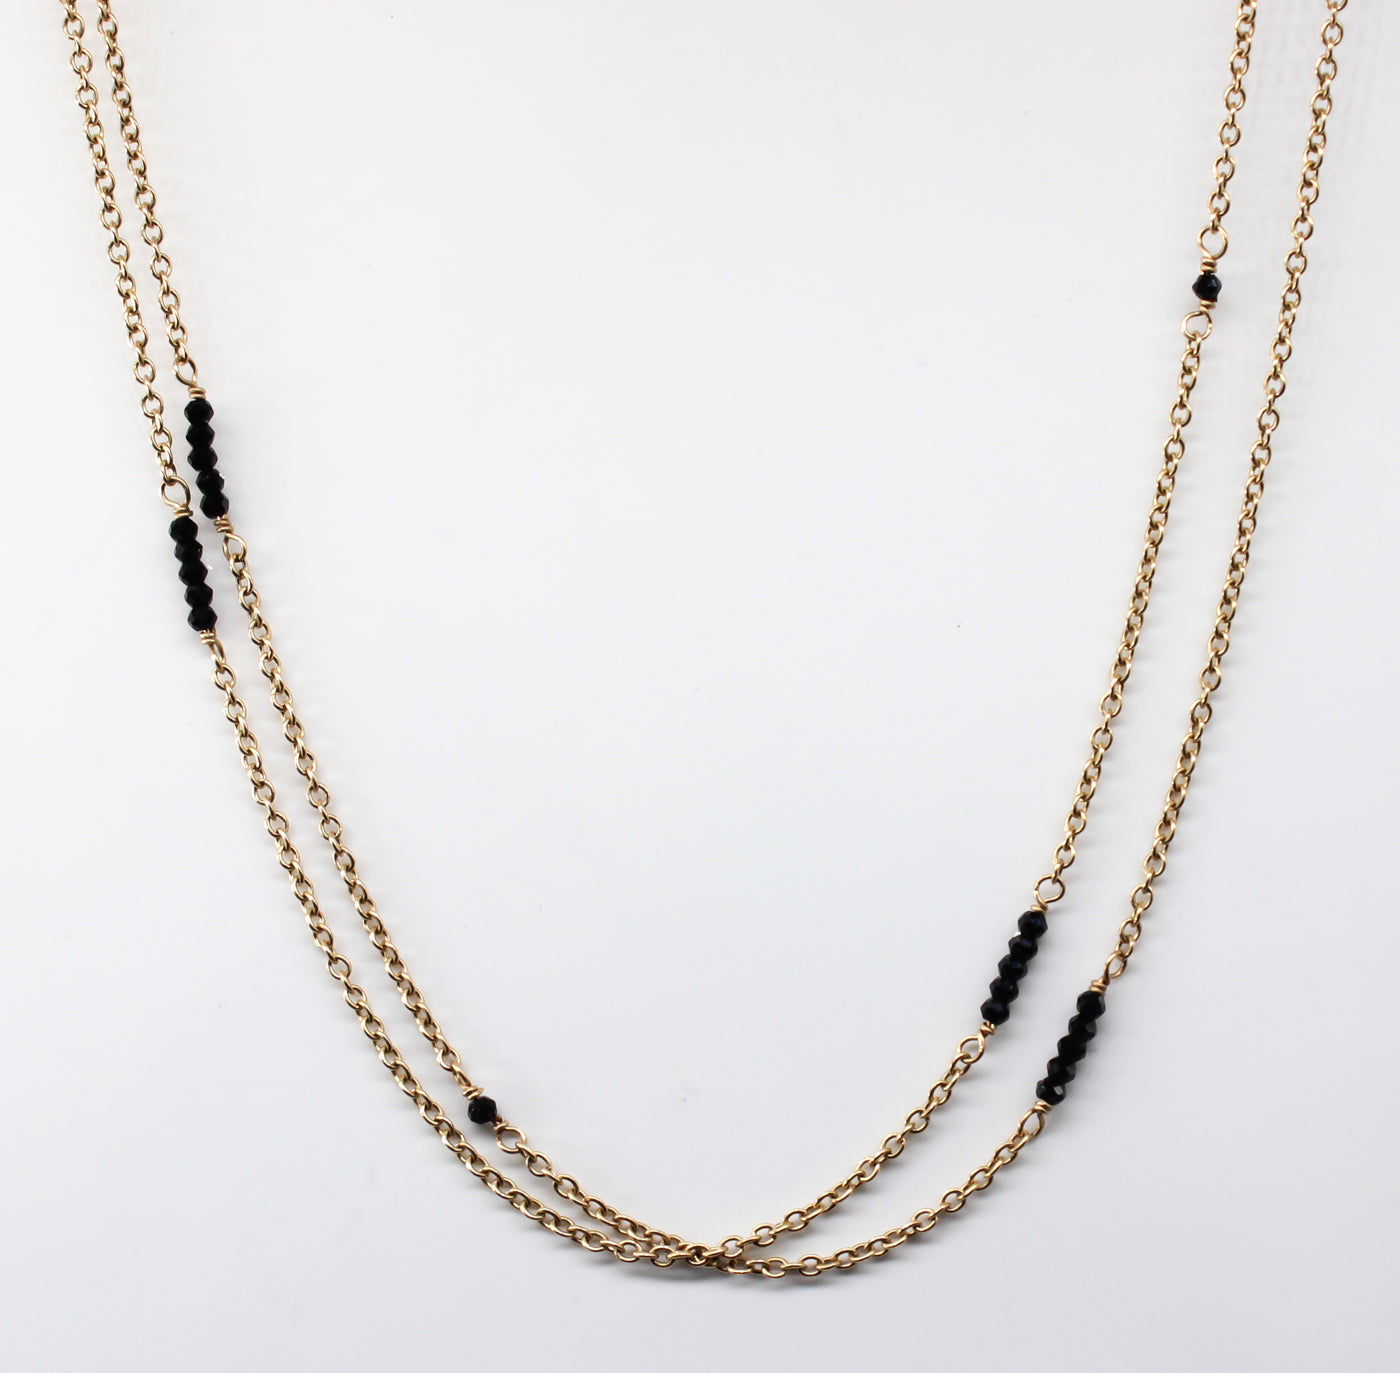 14K Yellow Gold Cable Chain with Faceted Black Spinel Beads